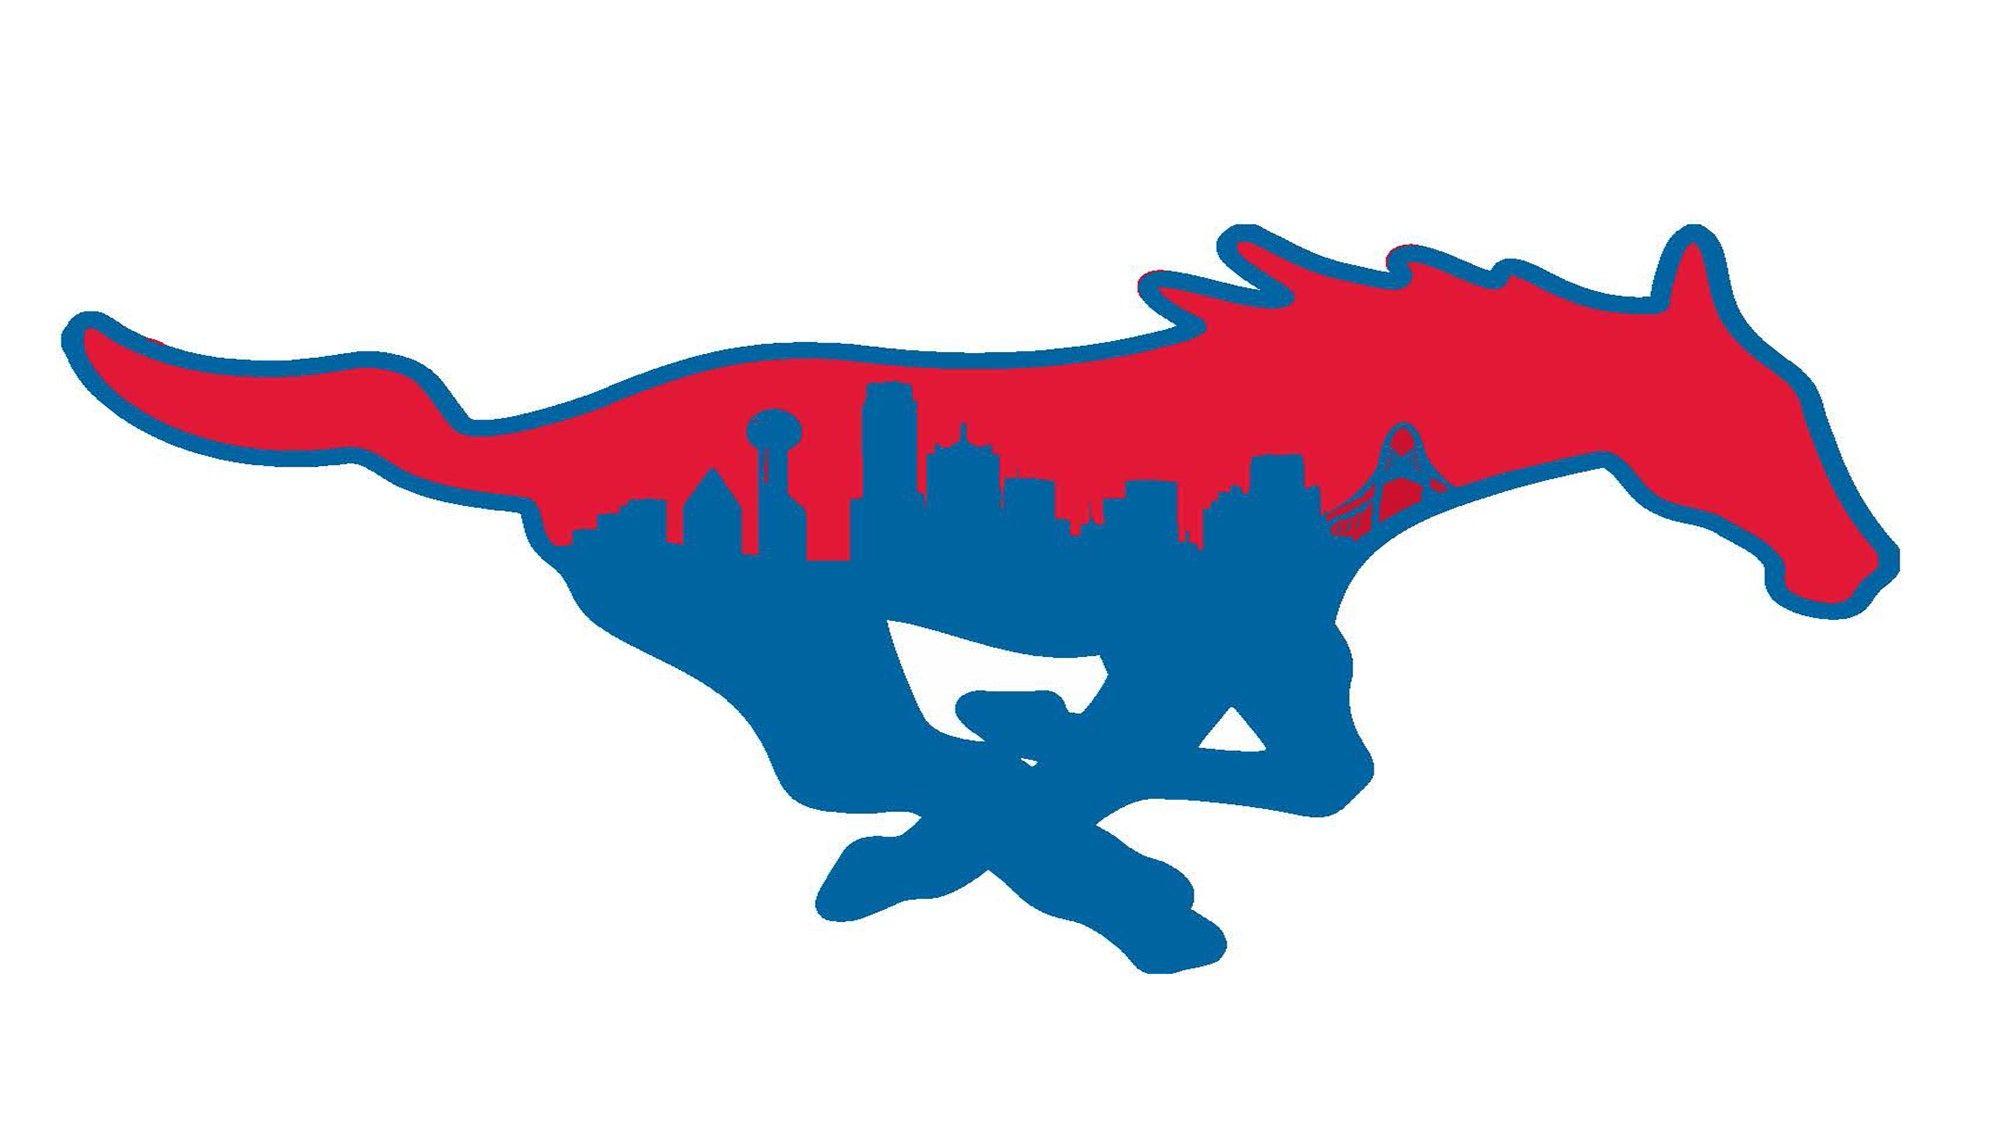 SMU Logo - College Sports: Check out the special Dallas skyline helmet decal